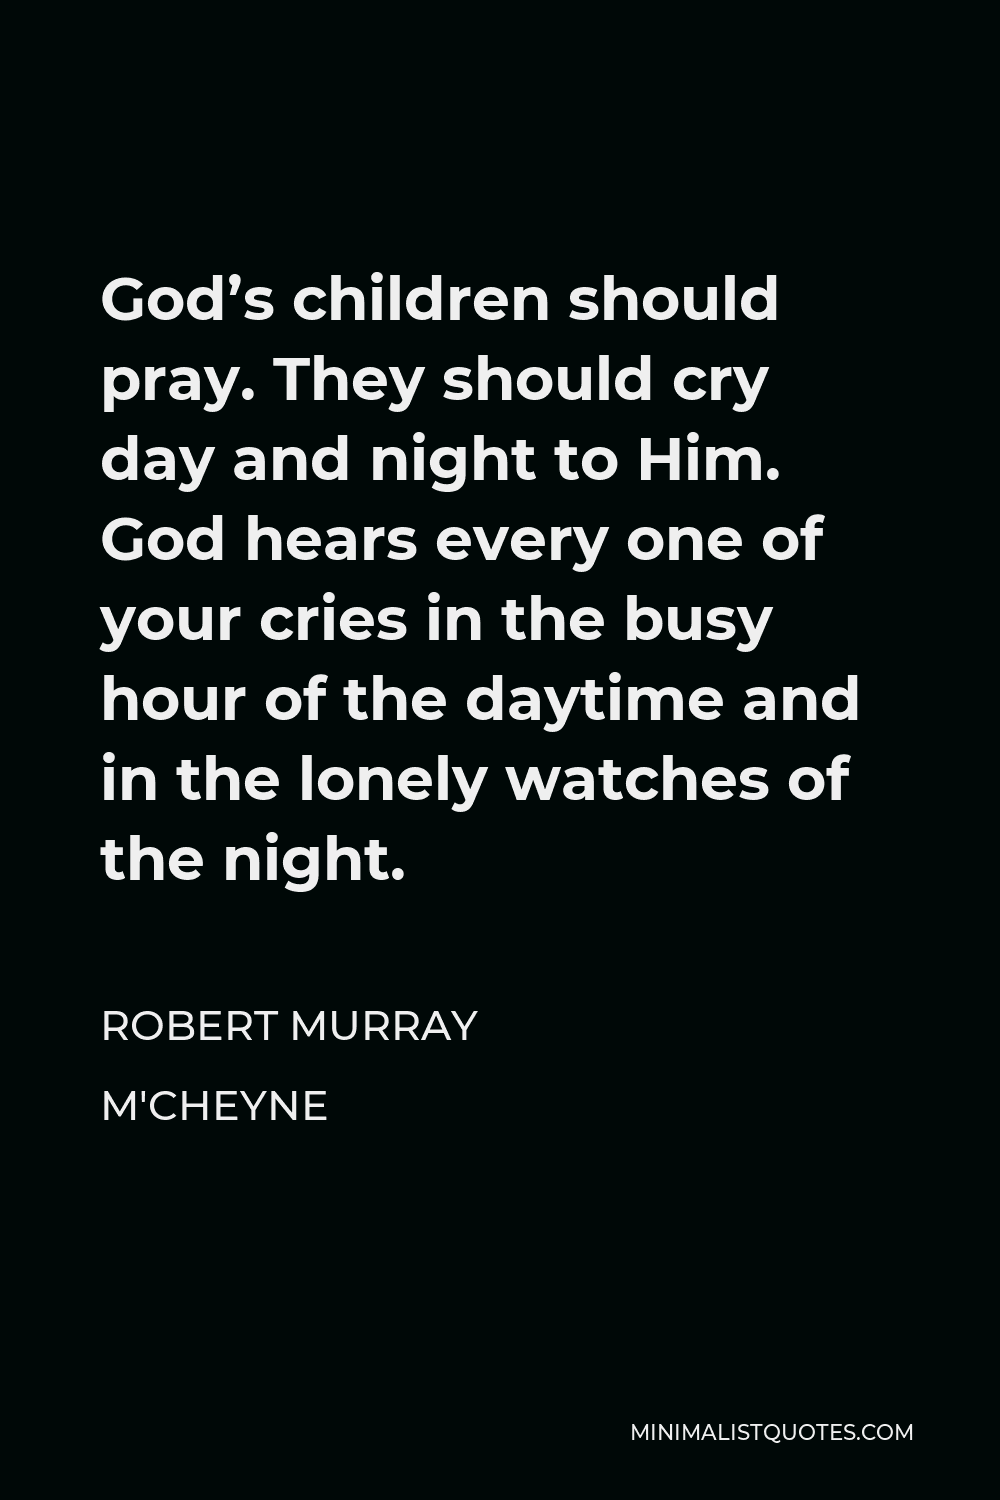 Robert Murray M'Cheyne Quote - God’s children should pray. They should cry day and night to Him. God hears every one of your cries in the busy hour of the daytime and in the lonely watches of the night.